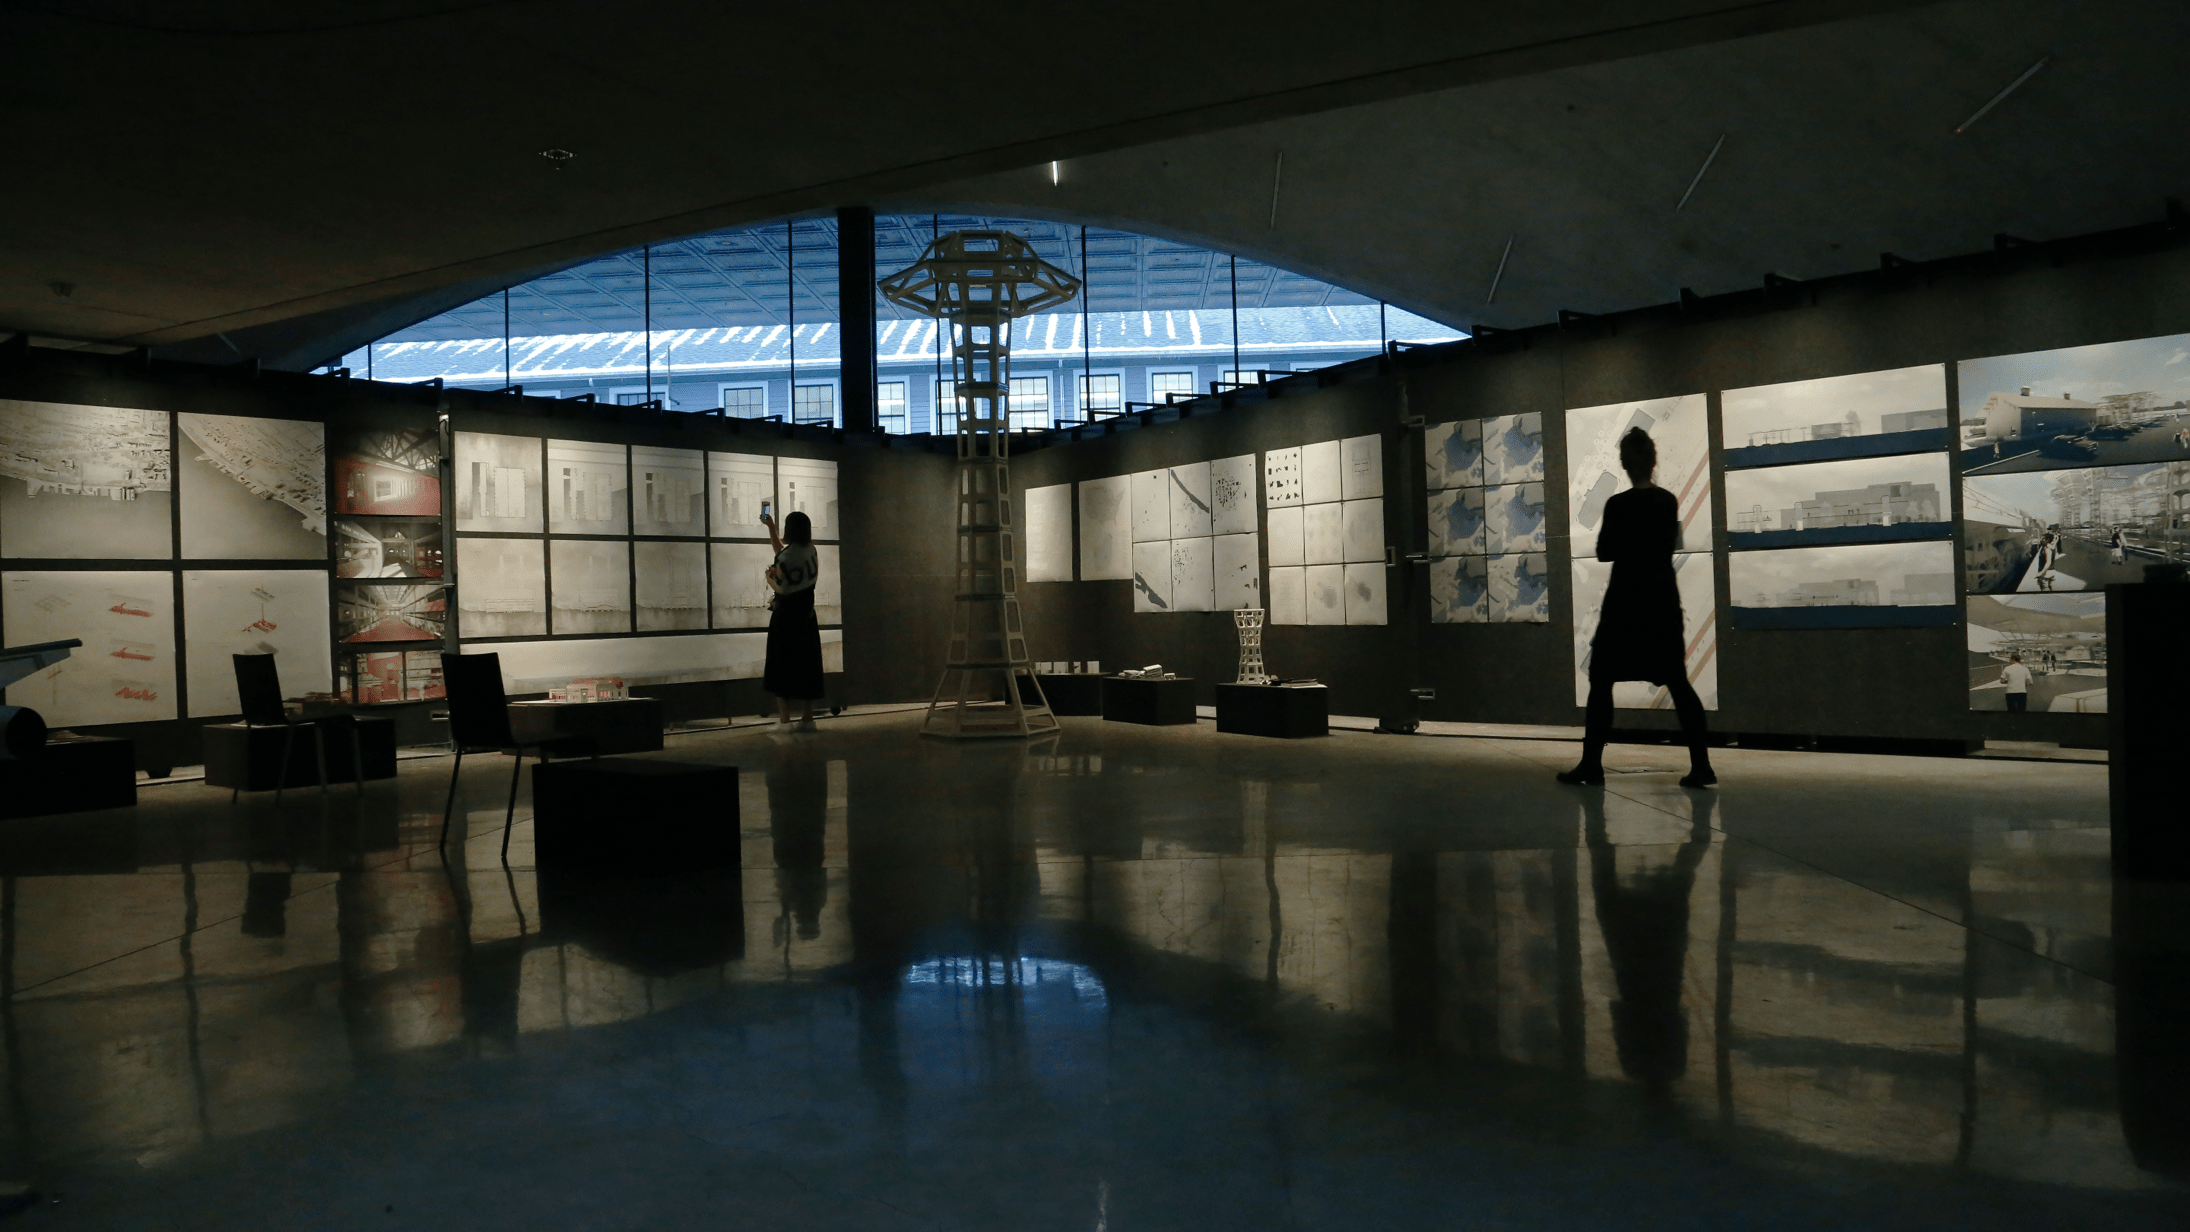 A person standing in a dimly lit room with a ceiling cutout.